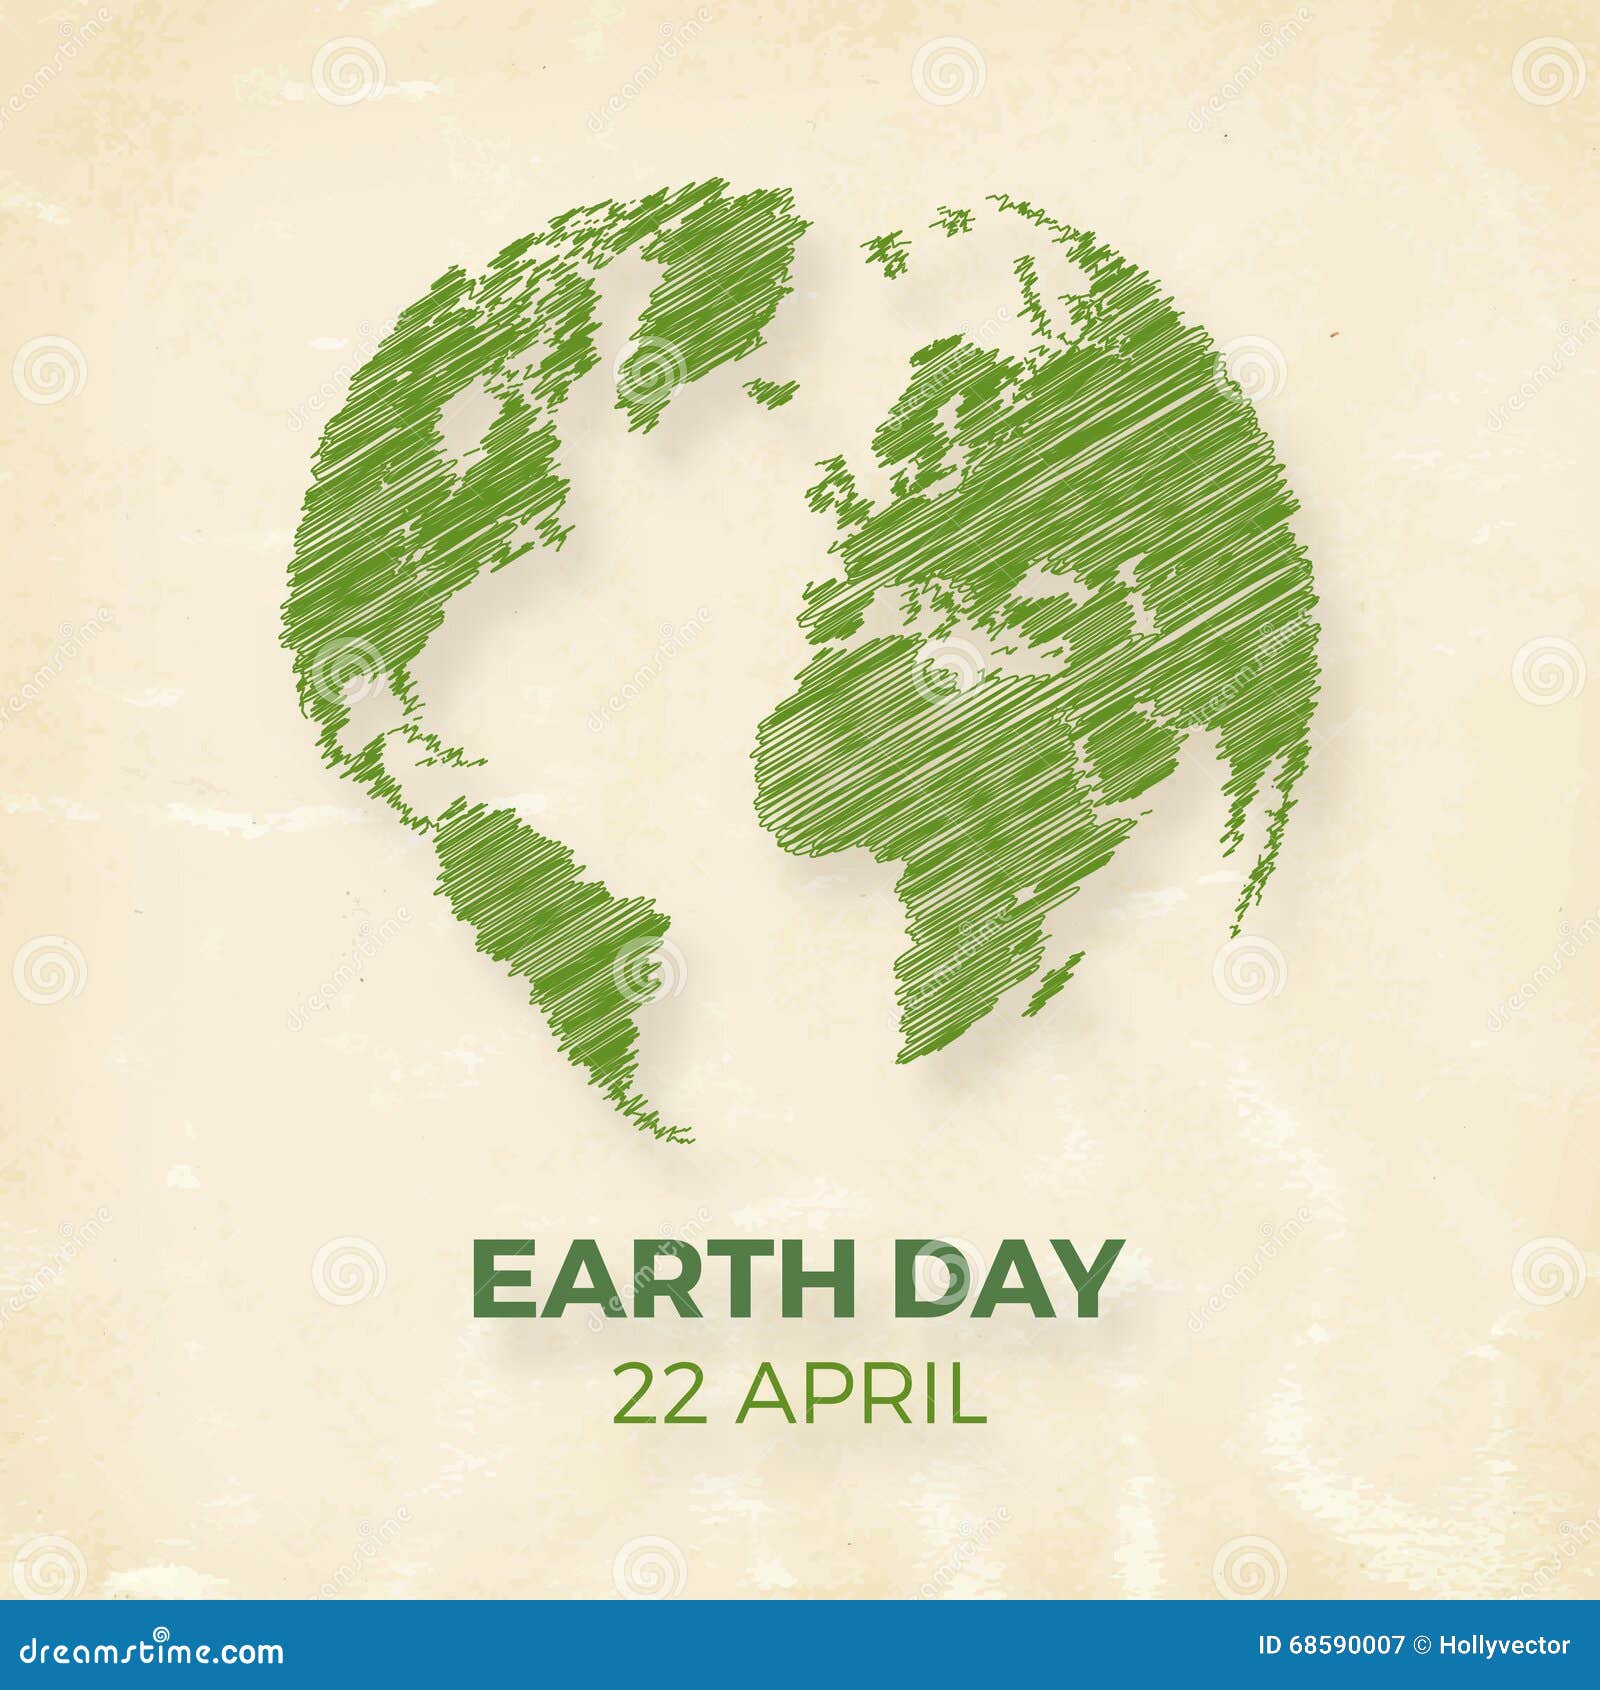 earth day, april 22